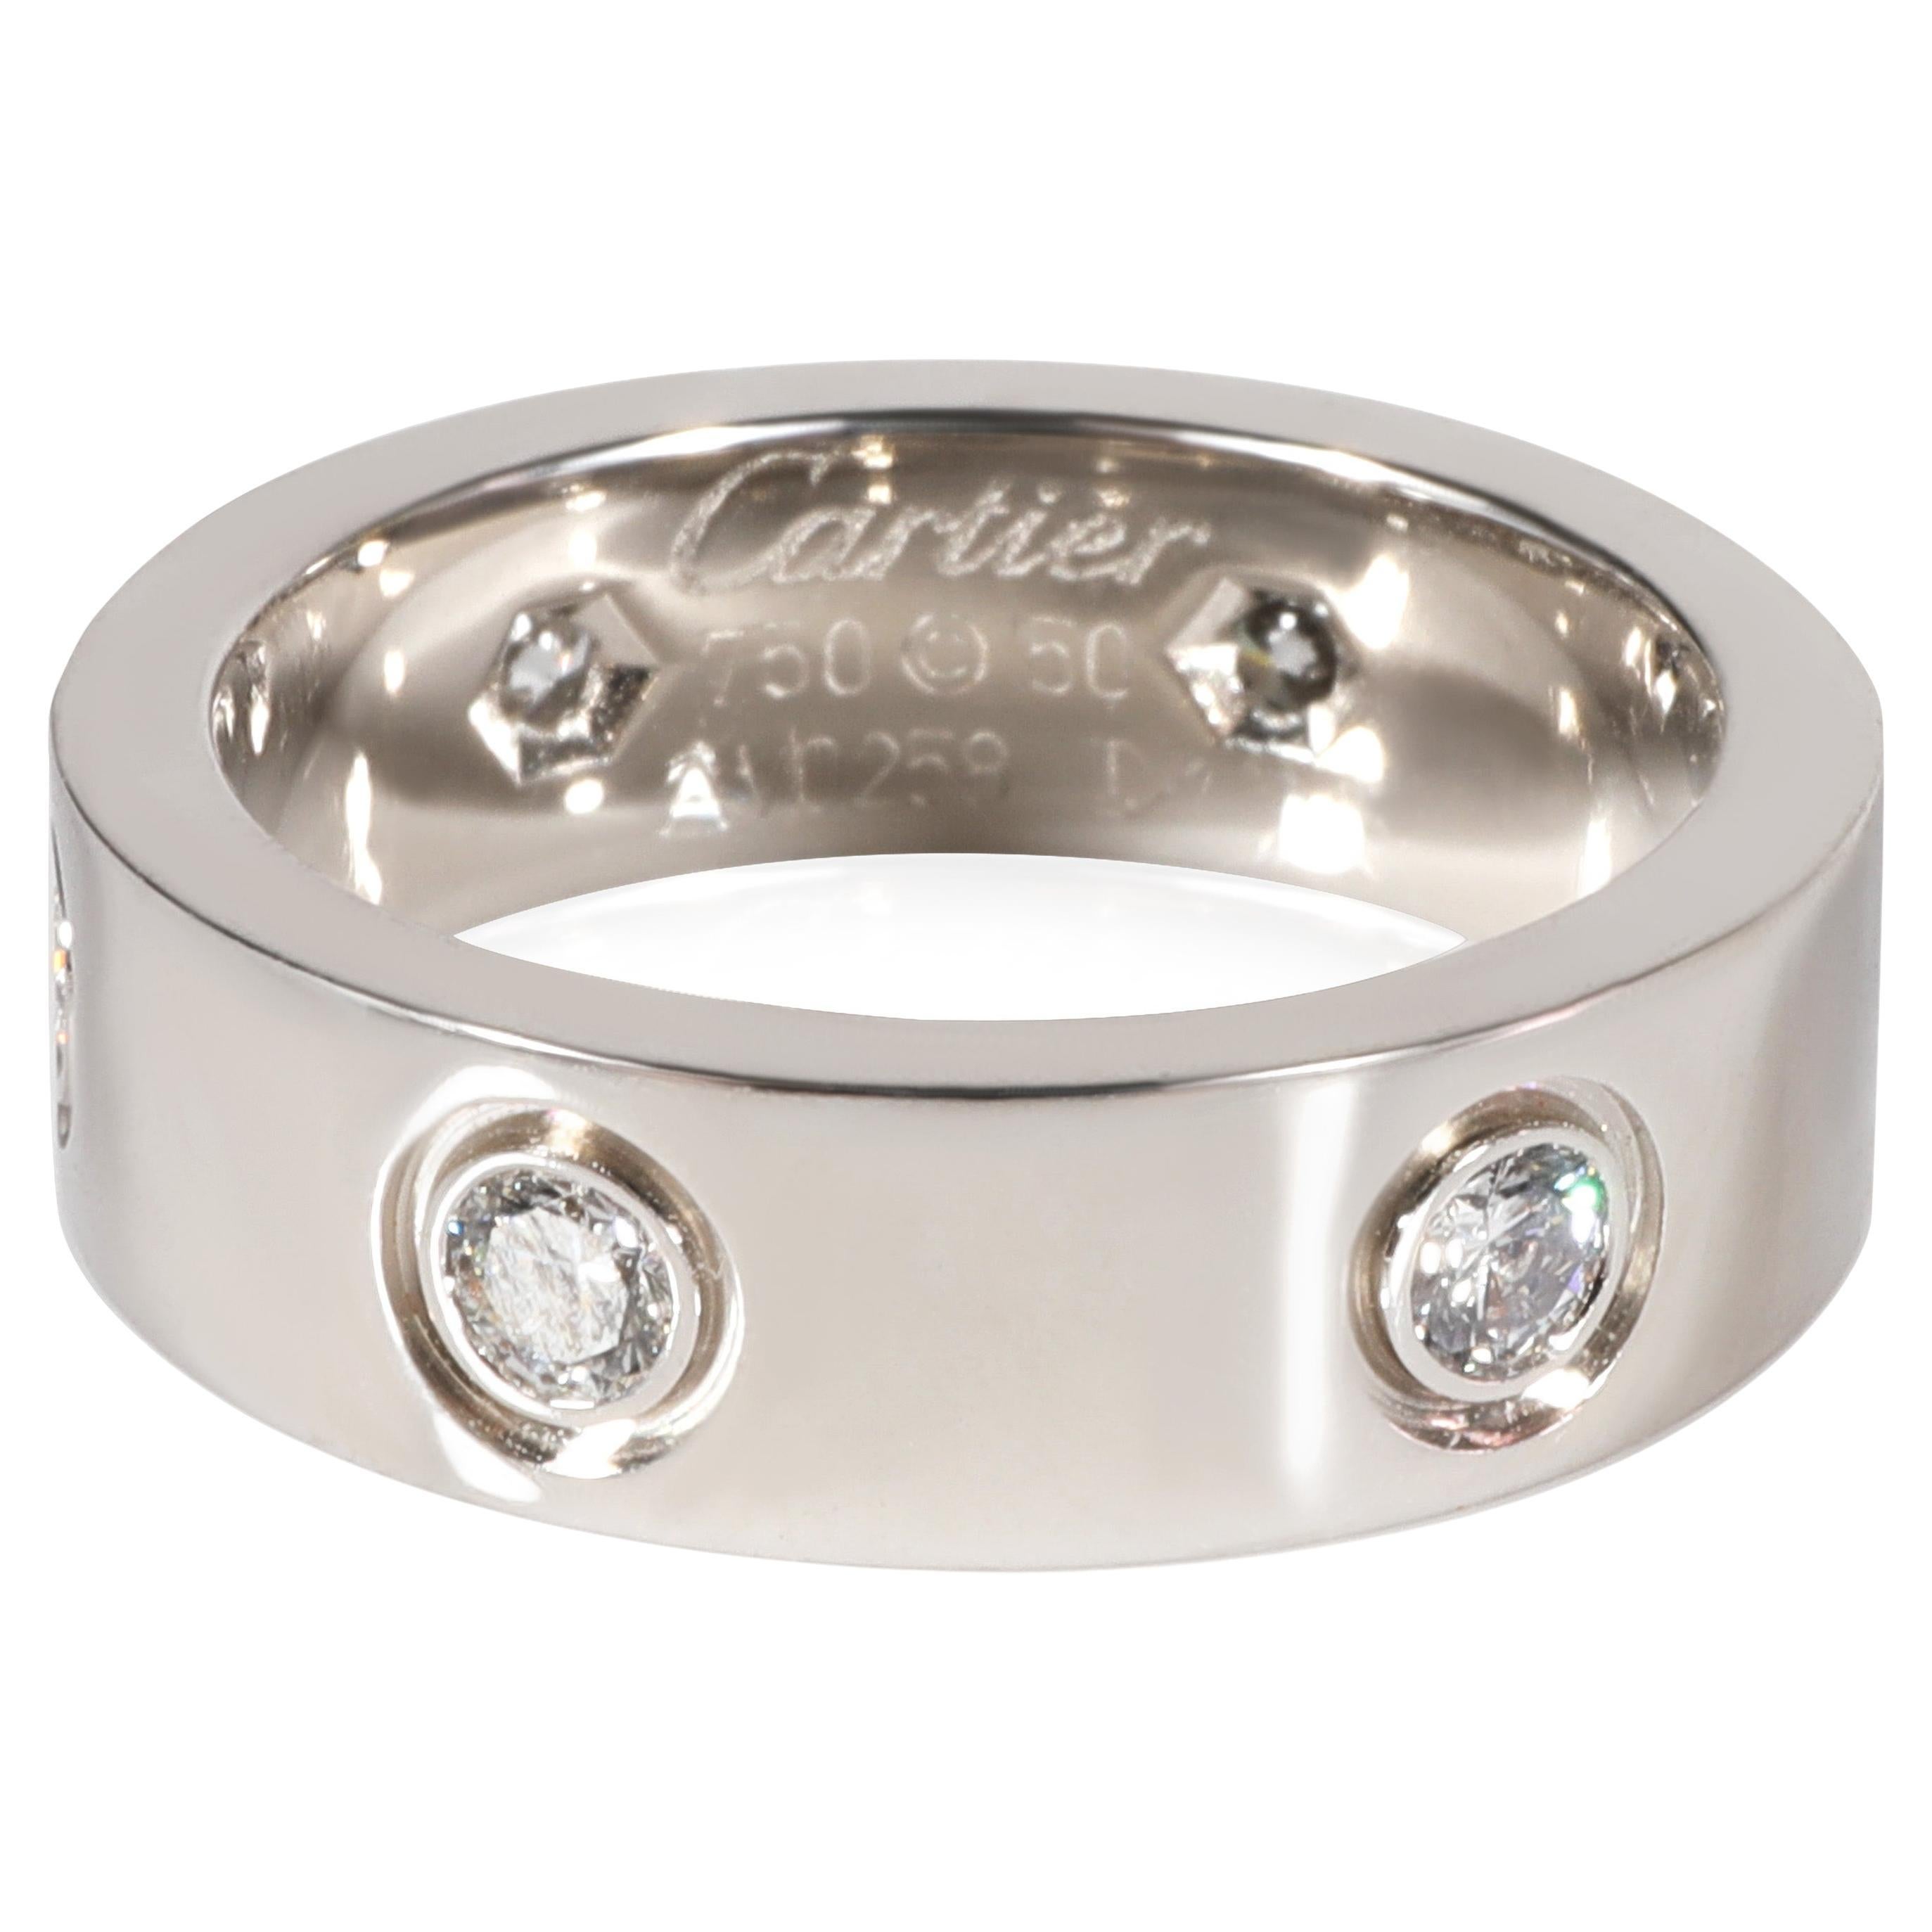 Cartier Love Diamond Wedding Band in 18k White Gold 0.46 CTW For Sale